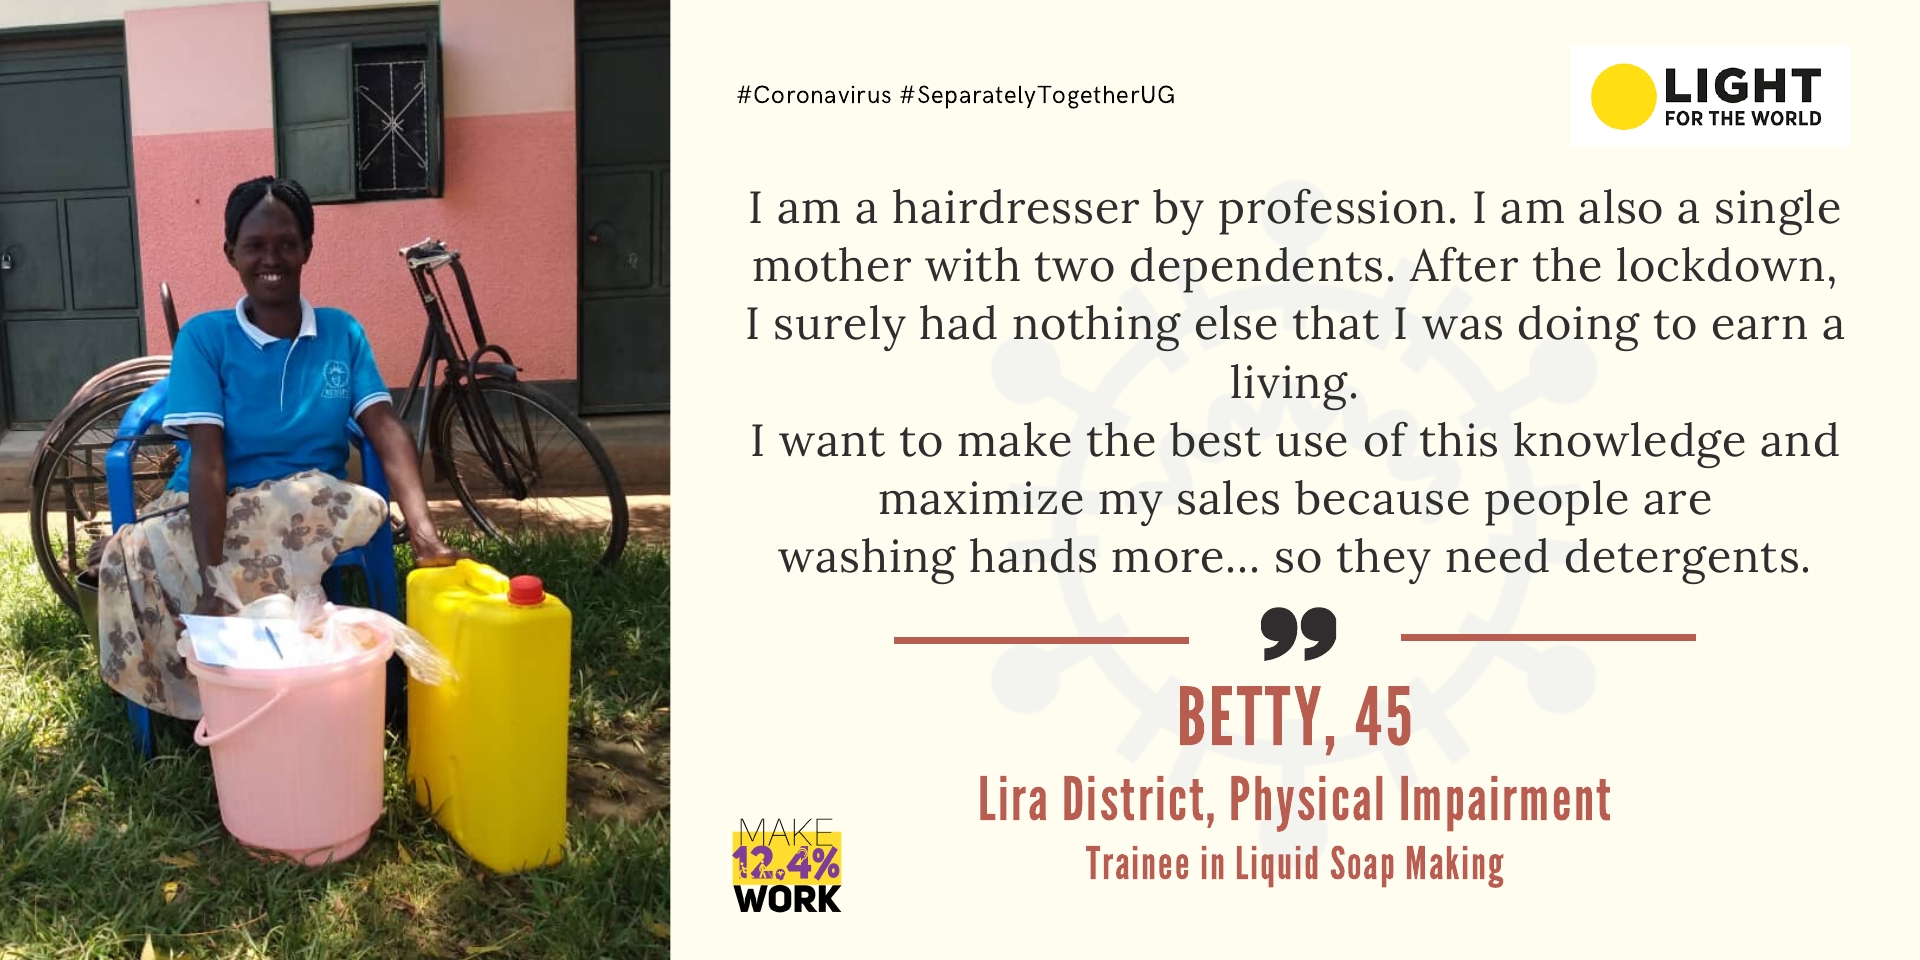 Betty is 45, she has a physical impairment and lives in Lira Town. She says, I am a hairdresser by profession… I am also a single mother with two dependents. After the lockdown, I surely had nothing else that I was doing to earn a living. I want to make the best use of this knowledge and maximize my sales because people are washing hands more... so they need detergents. 